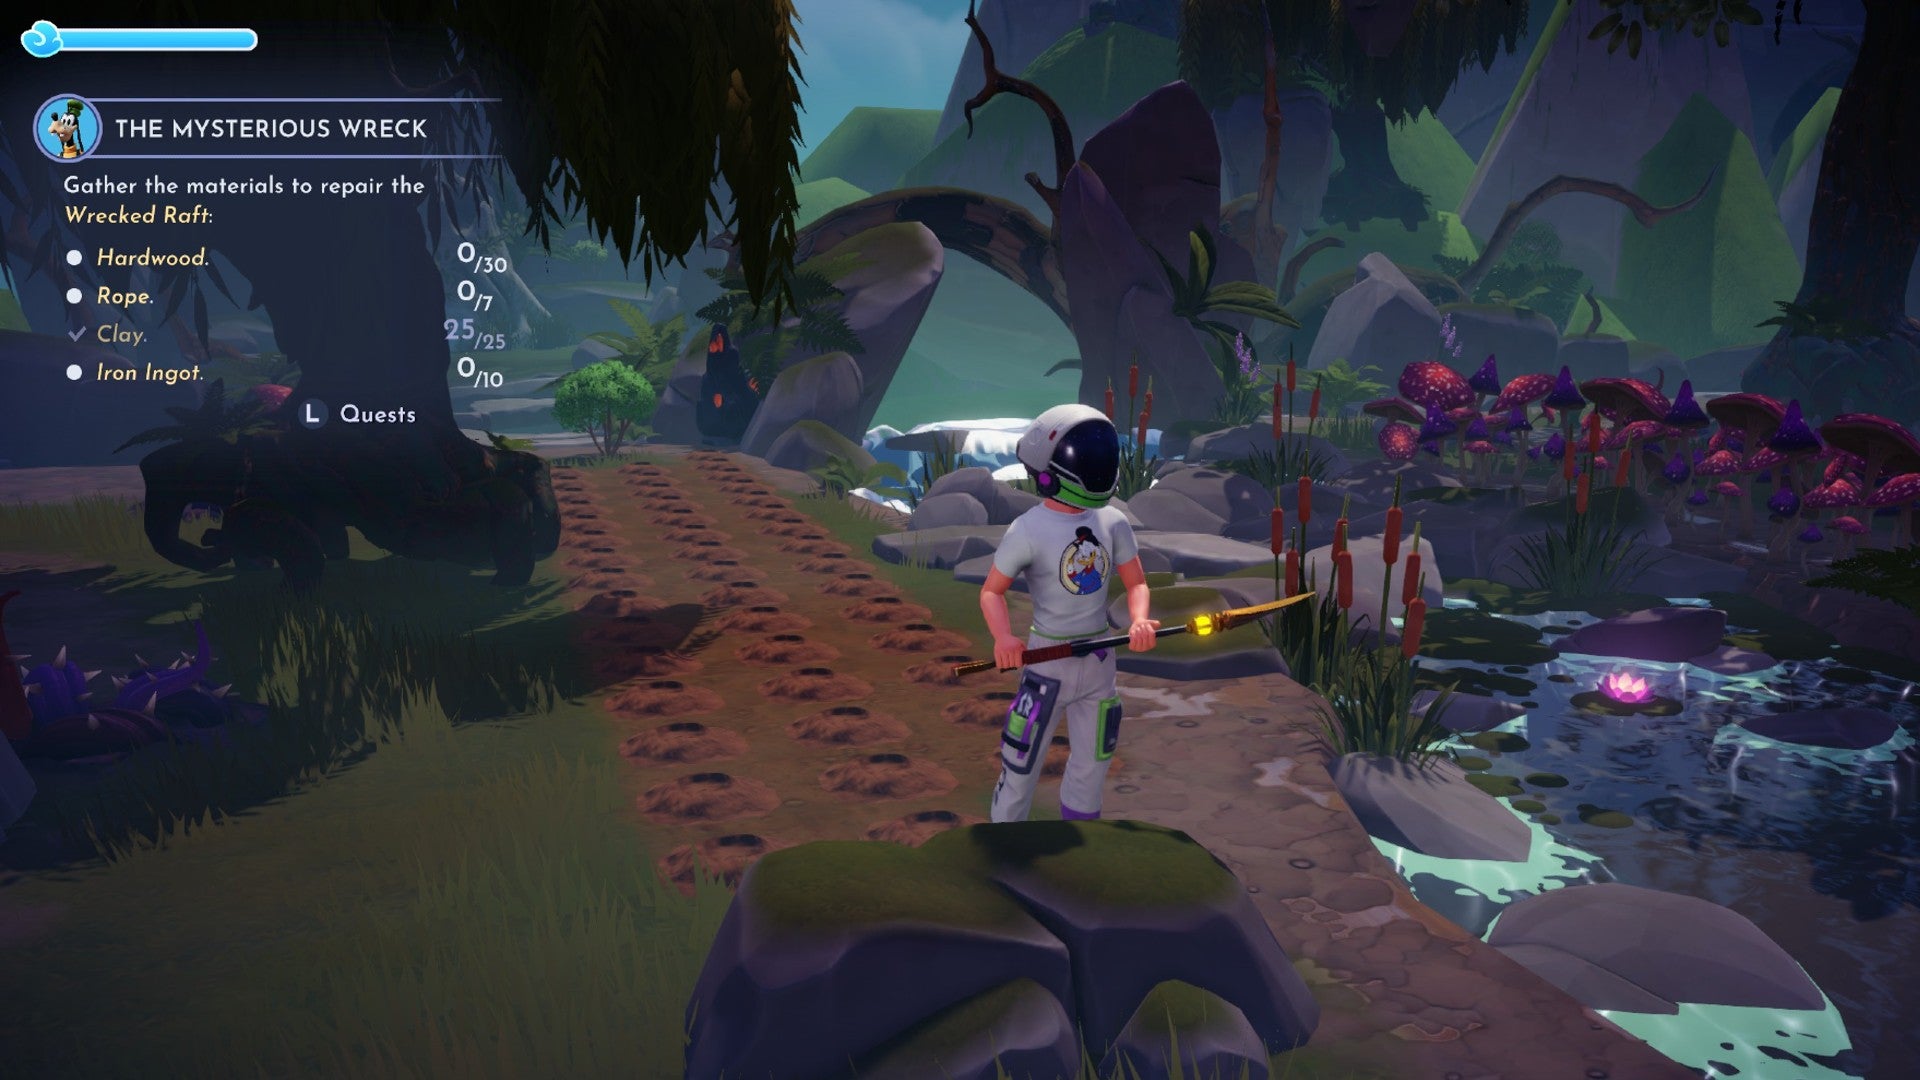 Disney Dreamlight Valley screenshot showing someone wearing a Buzz Lightyear helmet in a dark wooded area. There are three rows of holes in the ground to the left.